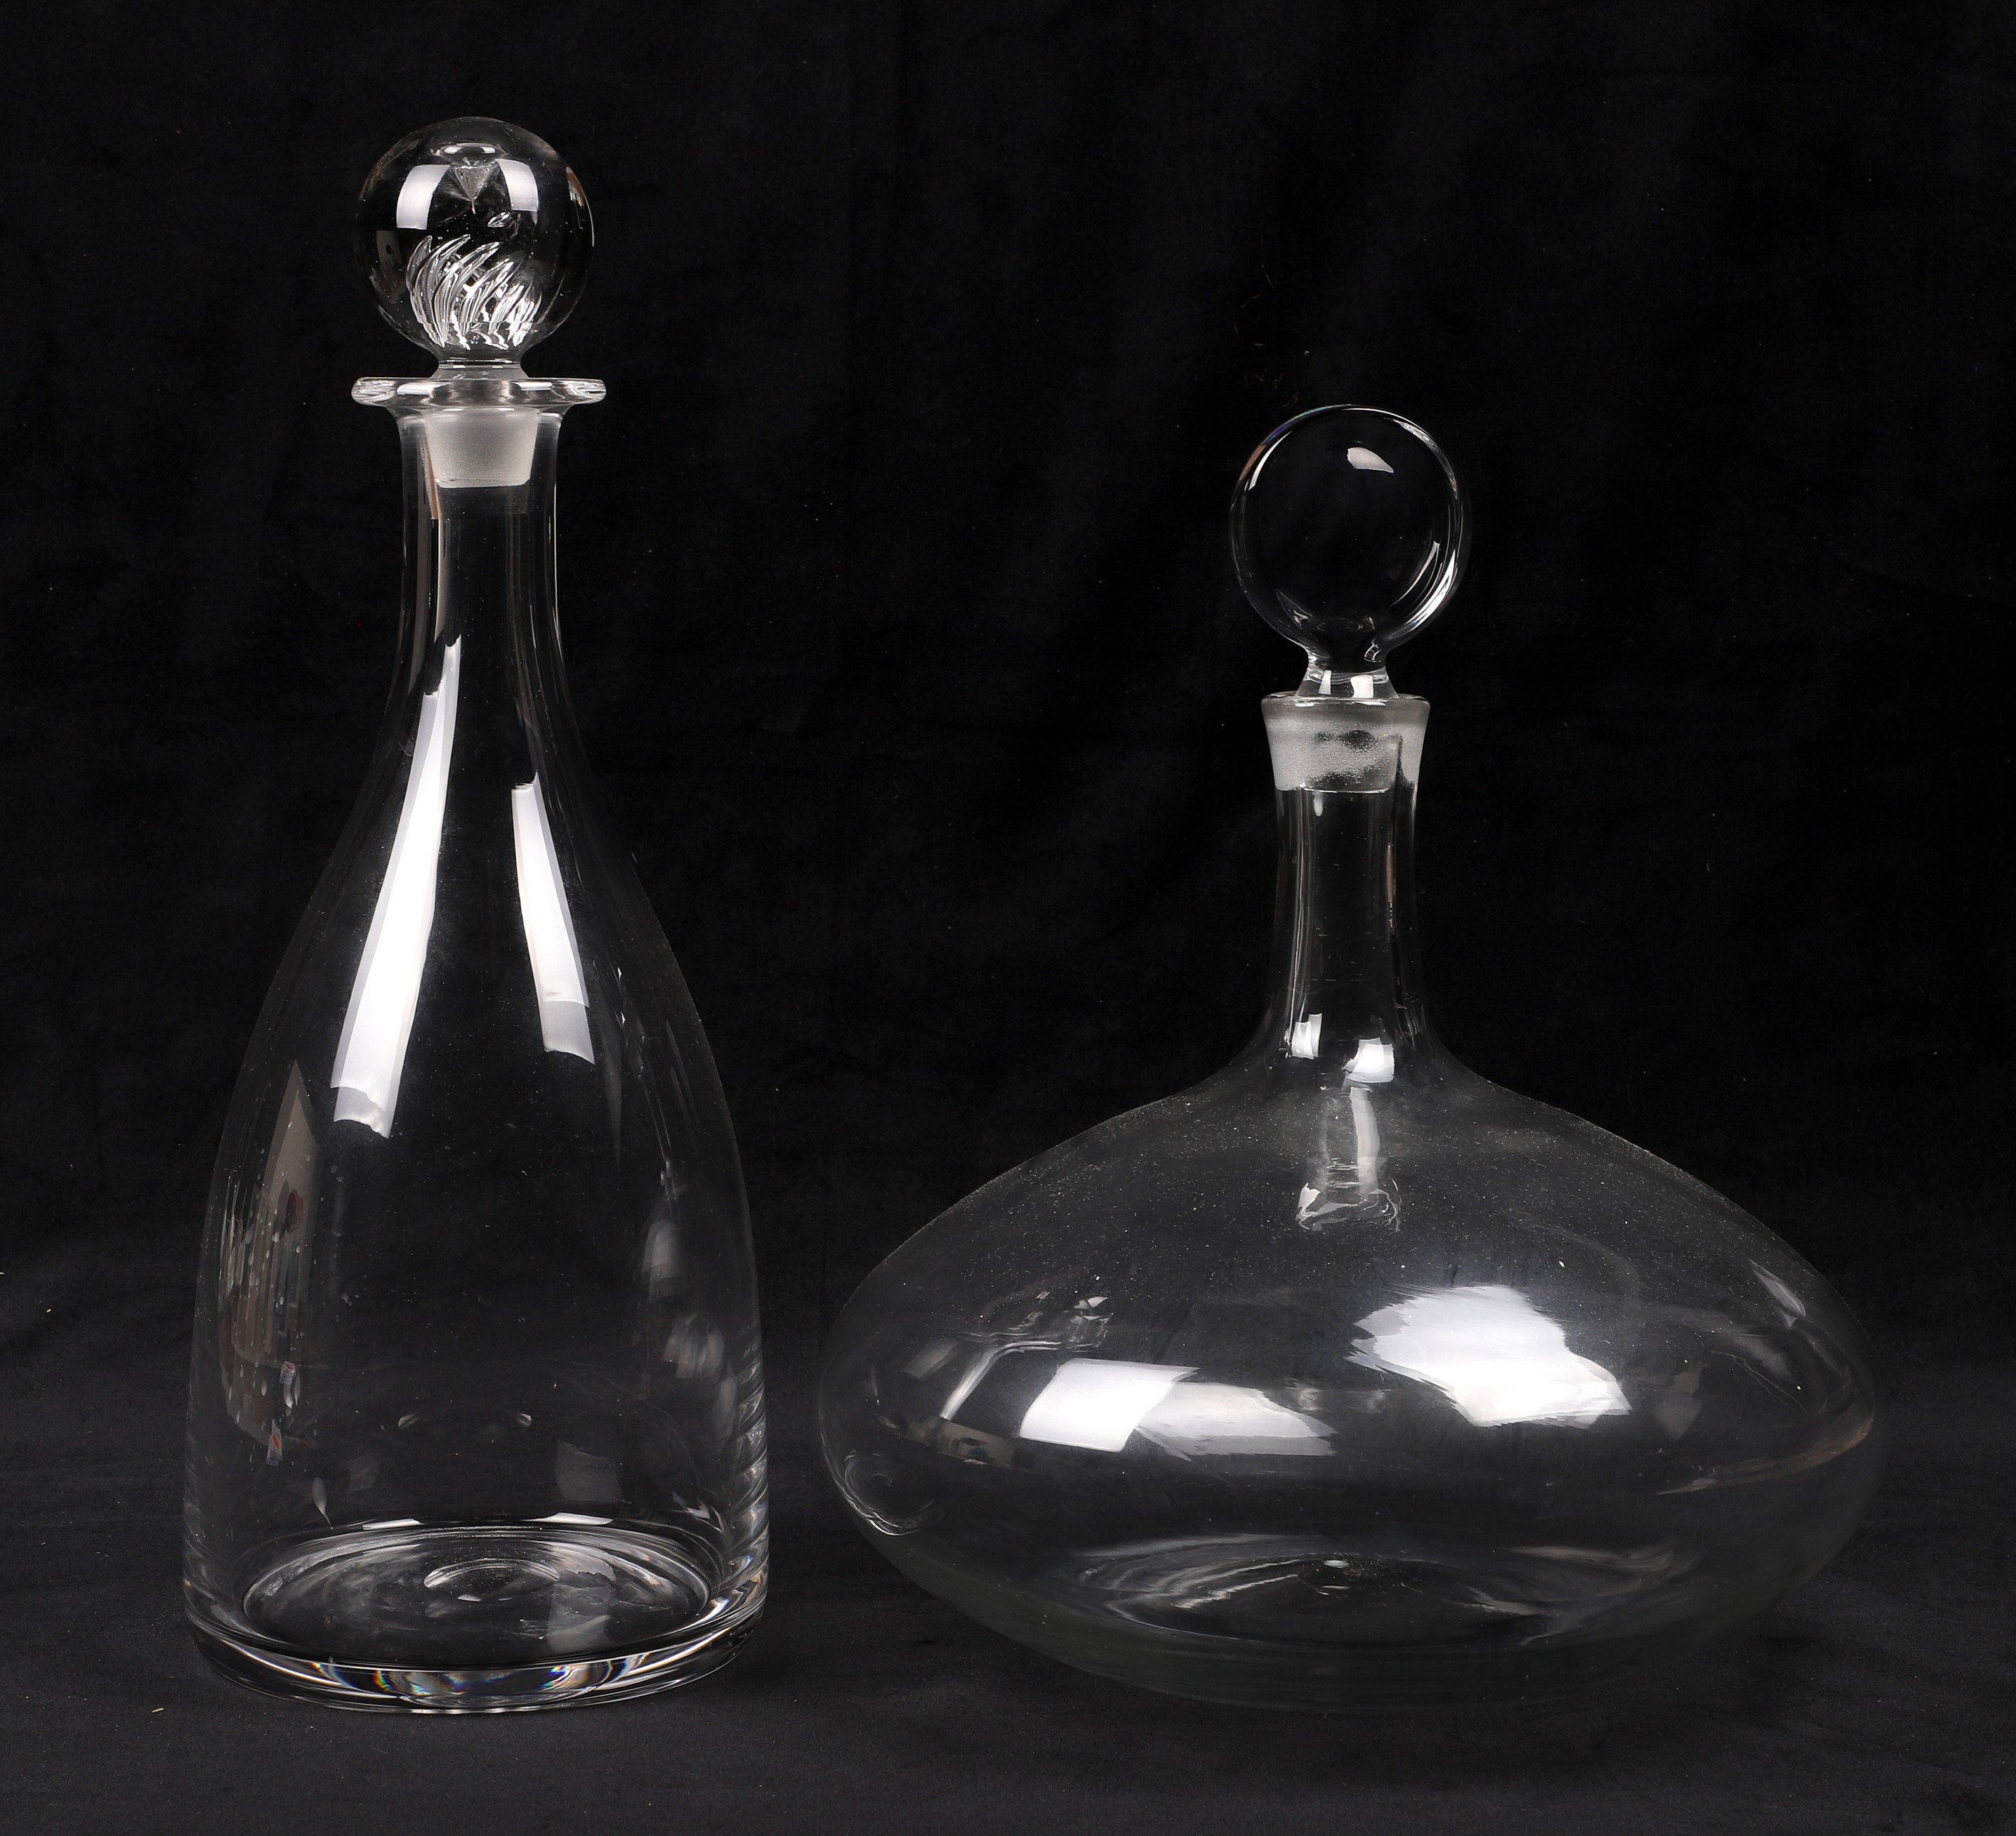  2 Oversized blown glass decanters  27a863